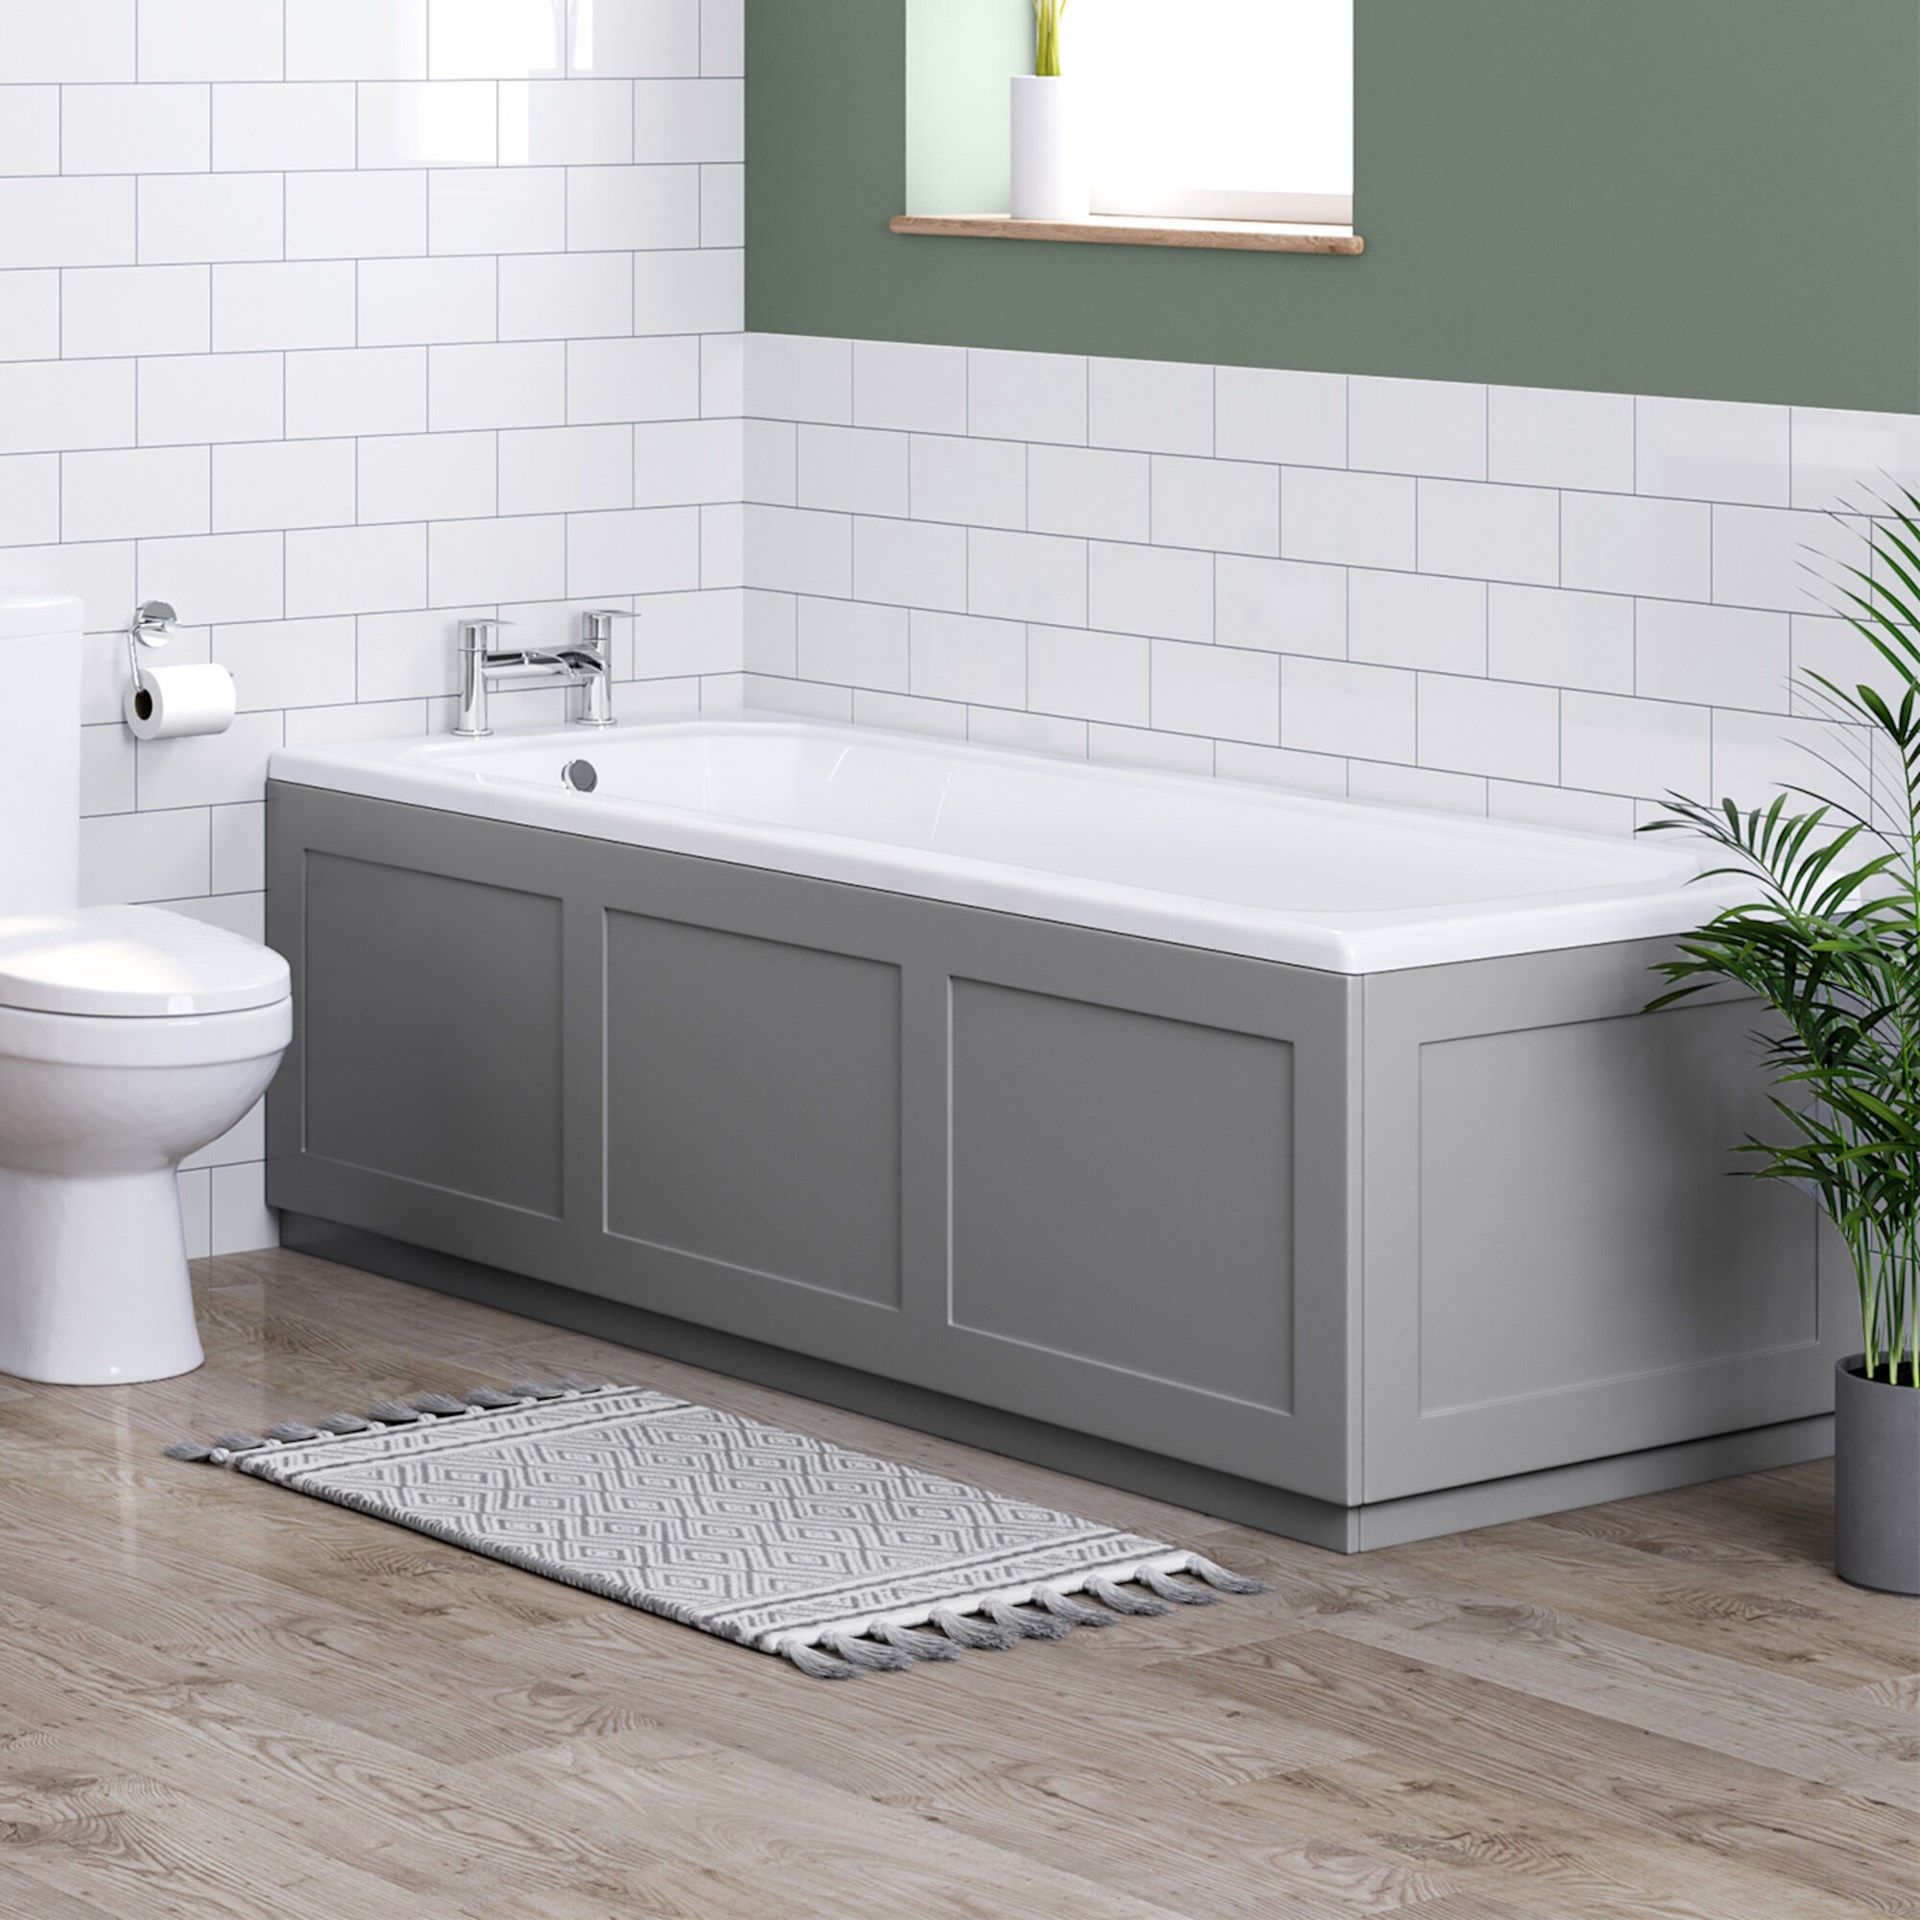 (DW66) 1800mm Melbourne Straight Bath Front Panel - Earl Grey. RRP £109.99.Traditional Earl G...